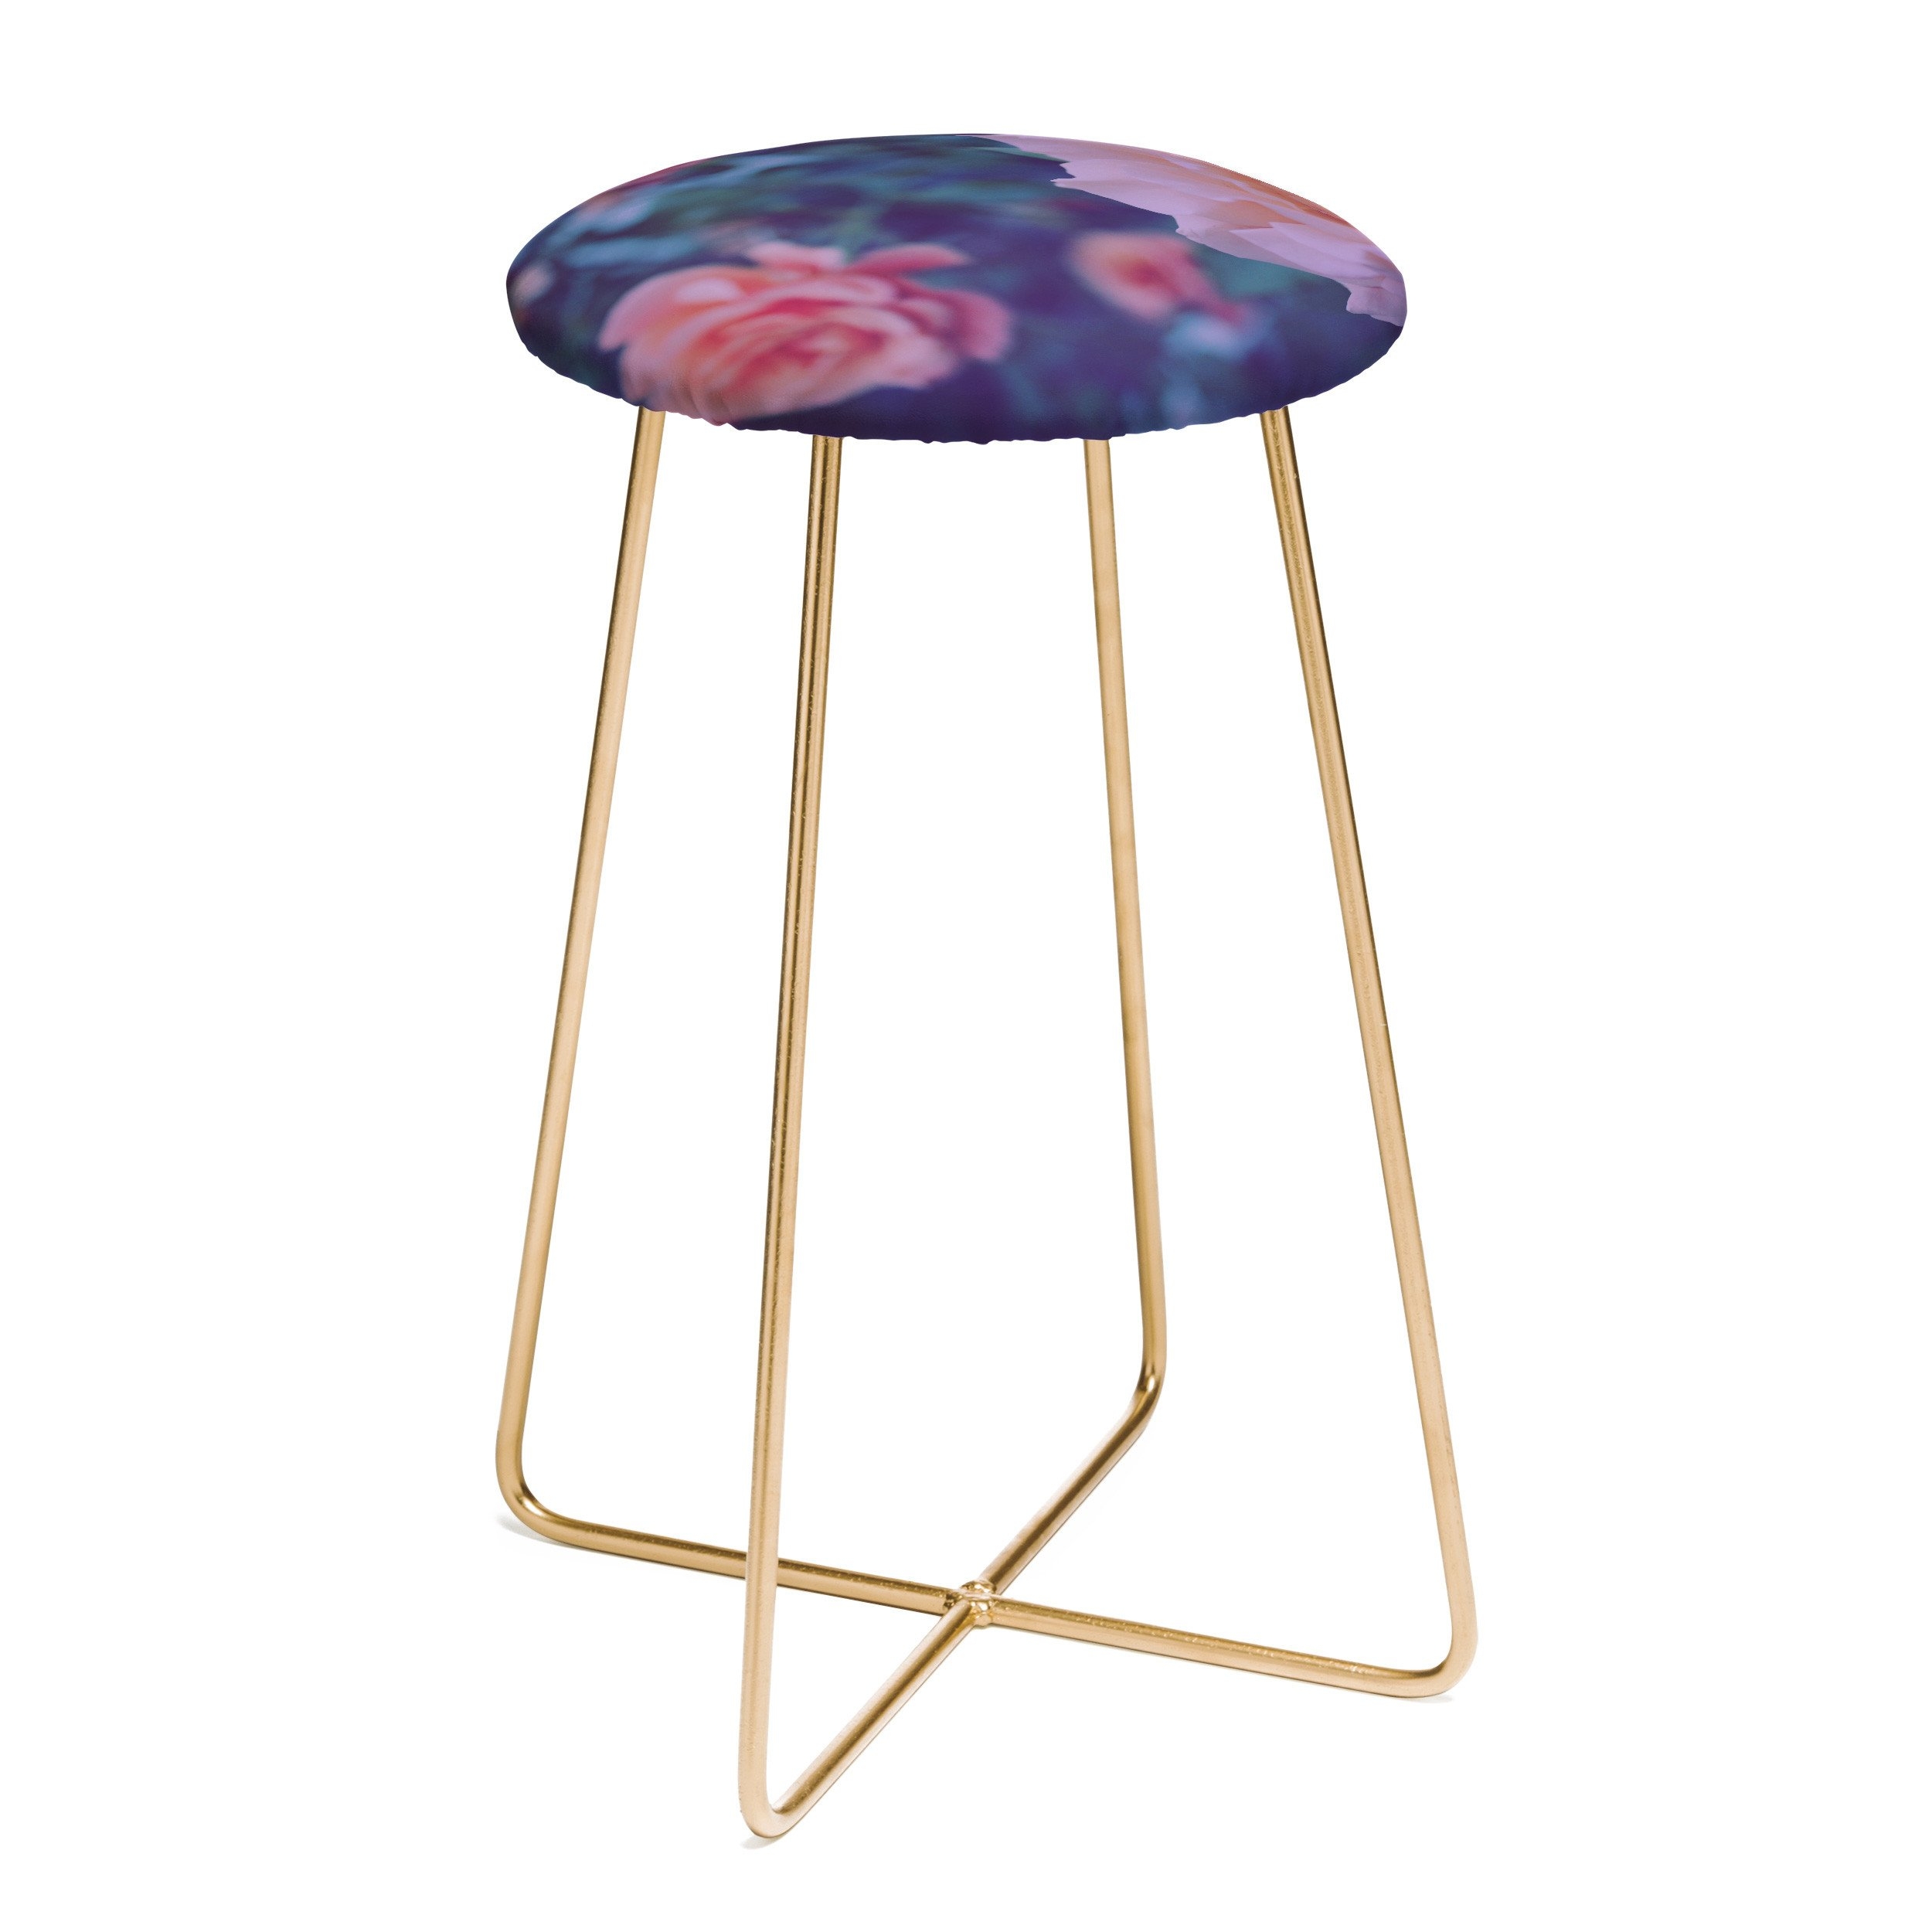 LEAH FLORES PRETTY FLORAL COUNTER STOOL - Gold Aston Legs - Image 0